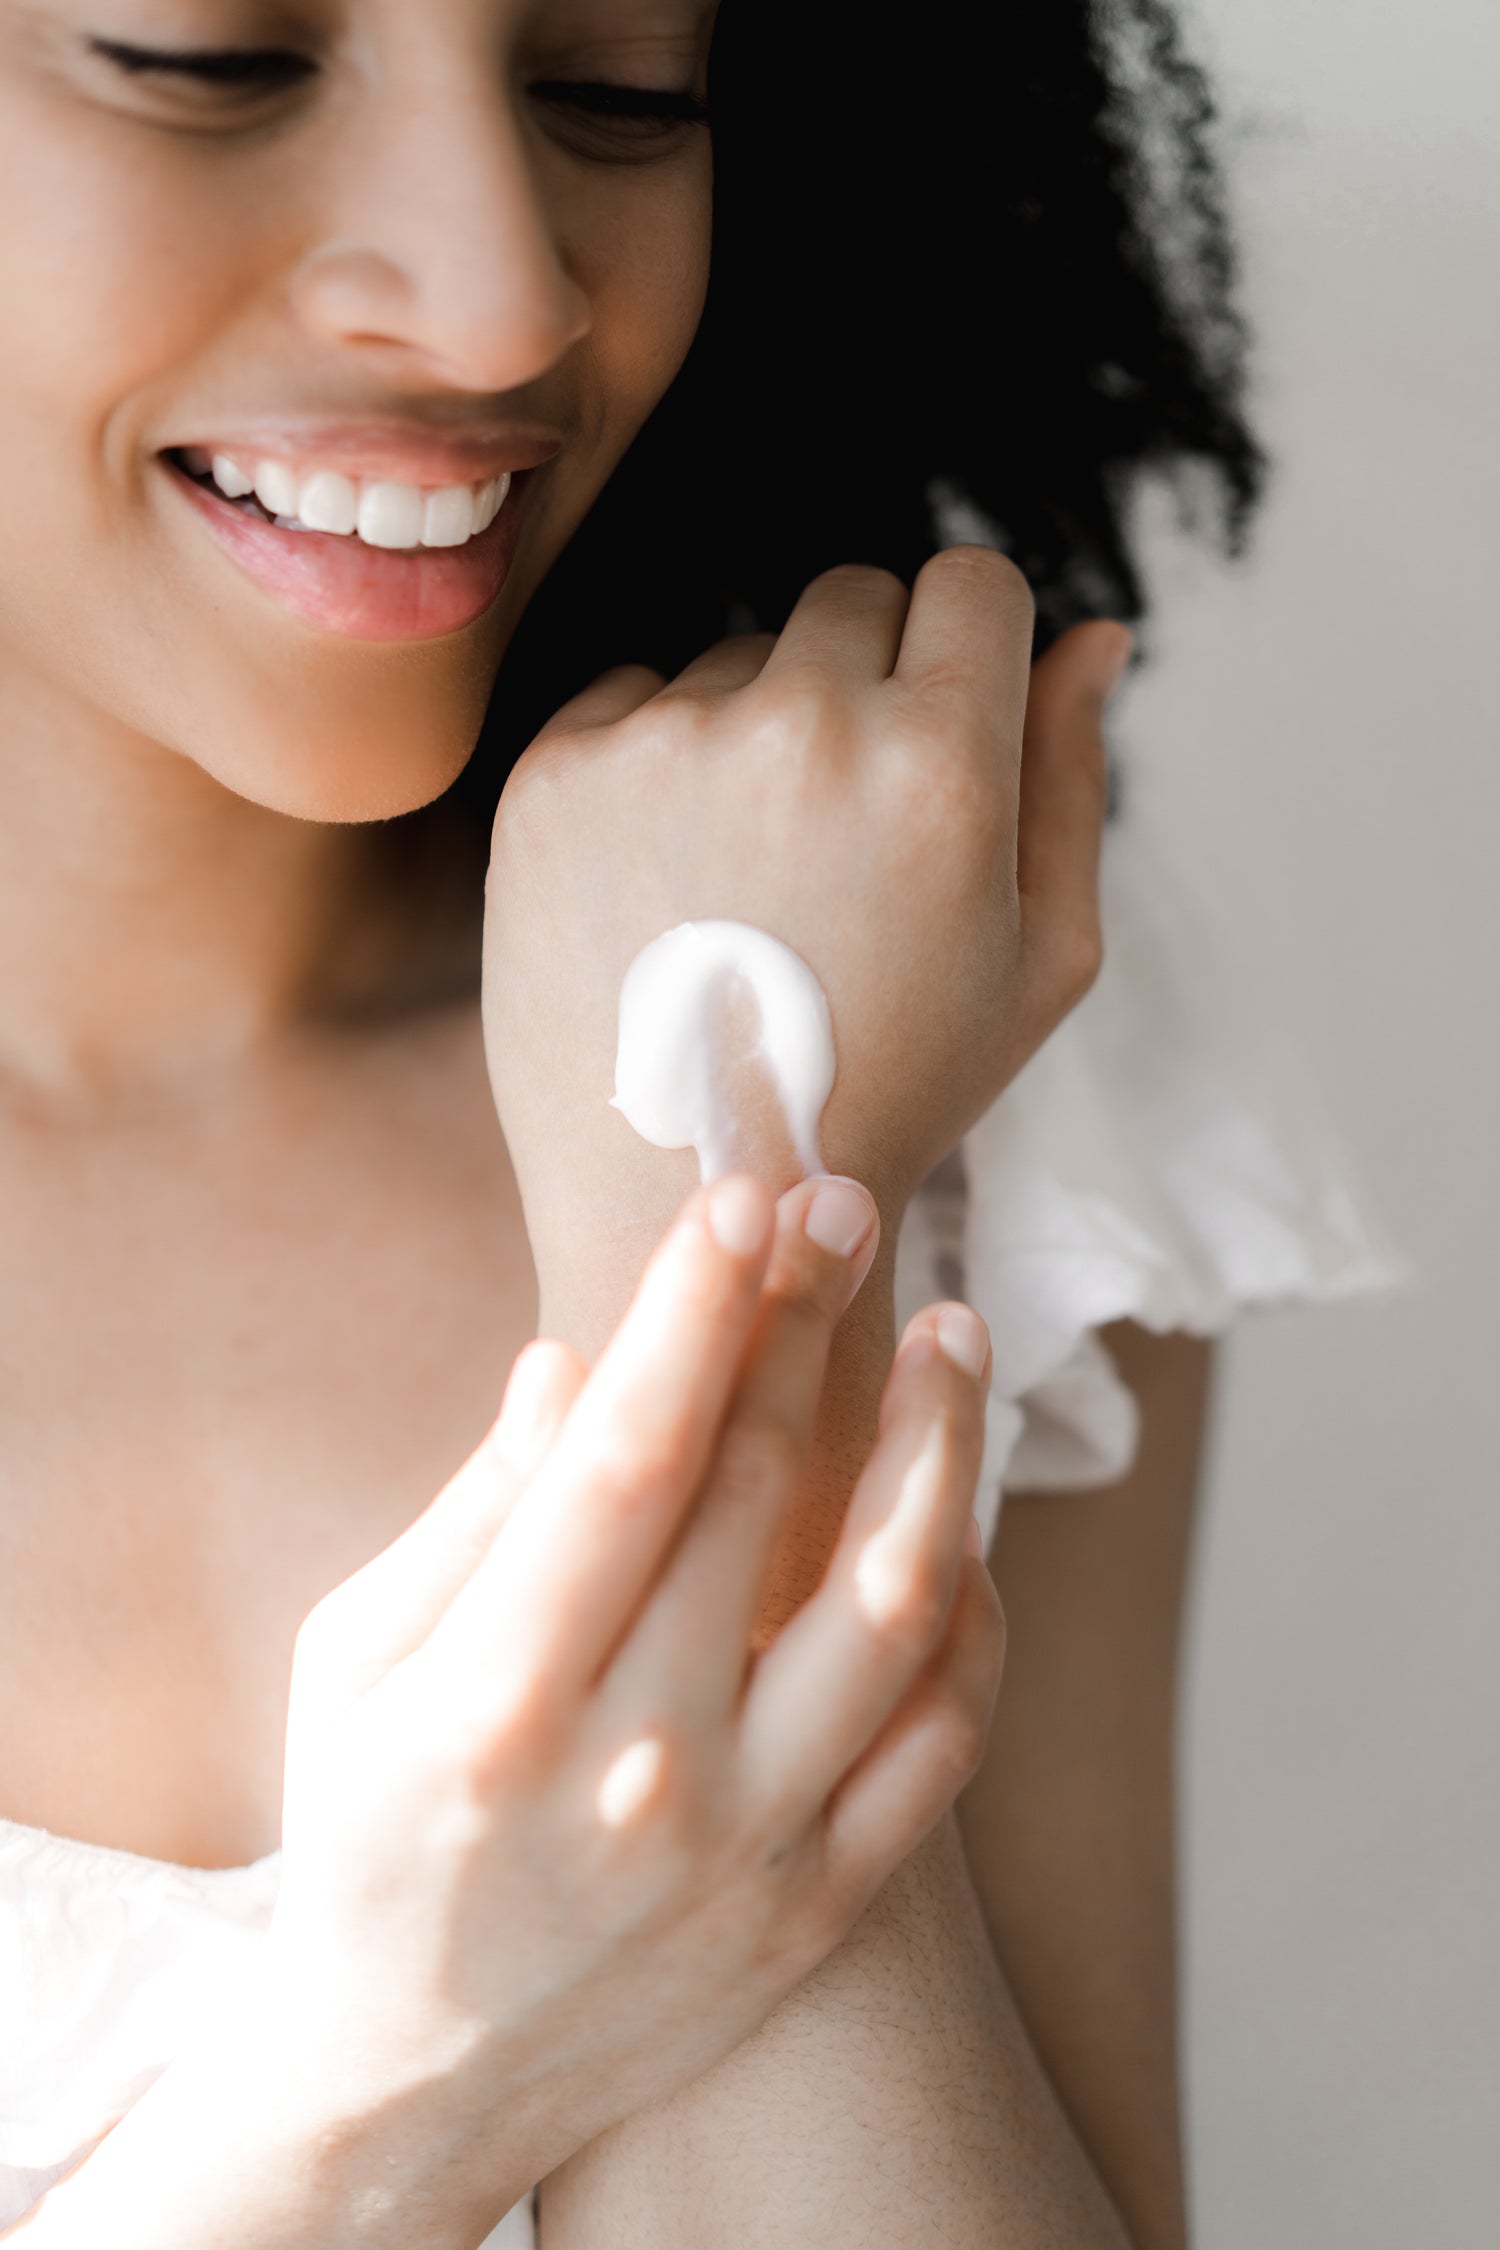 Woman applying cream to the back of her hand while smiling